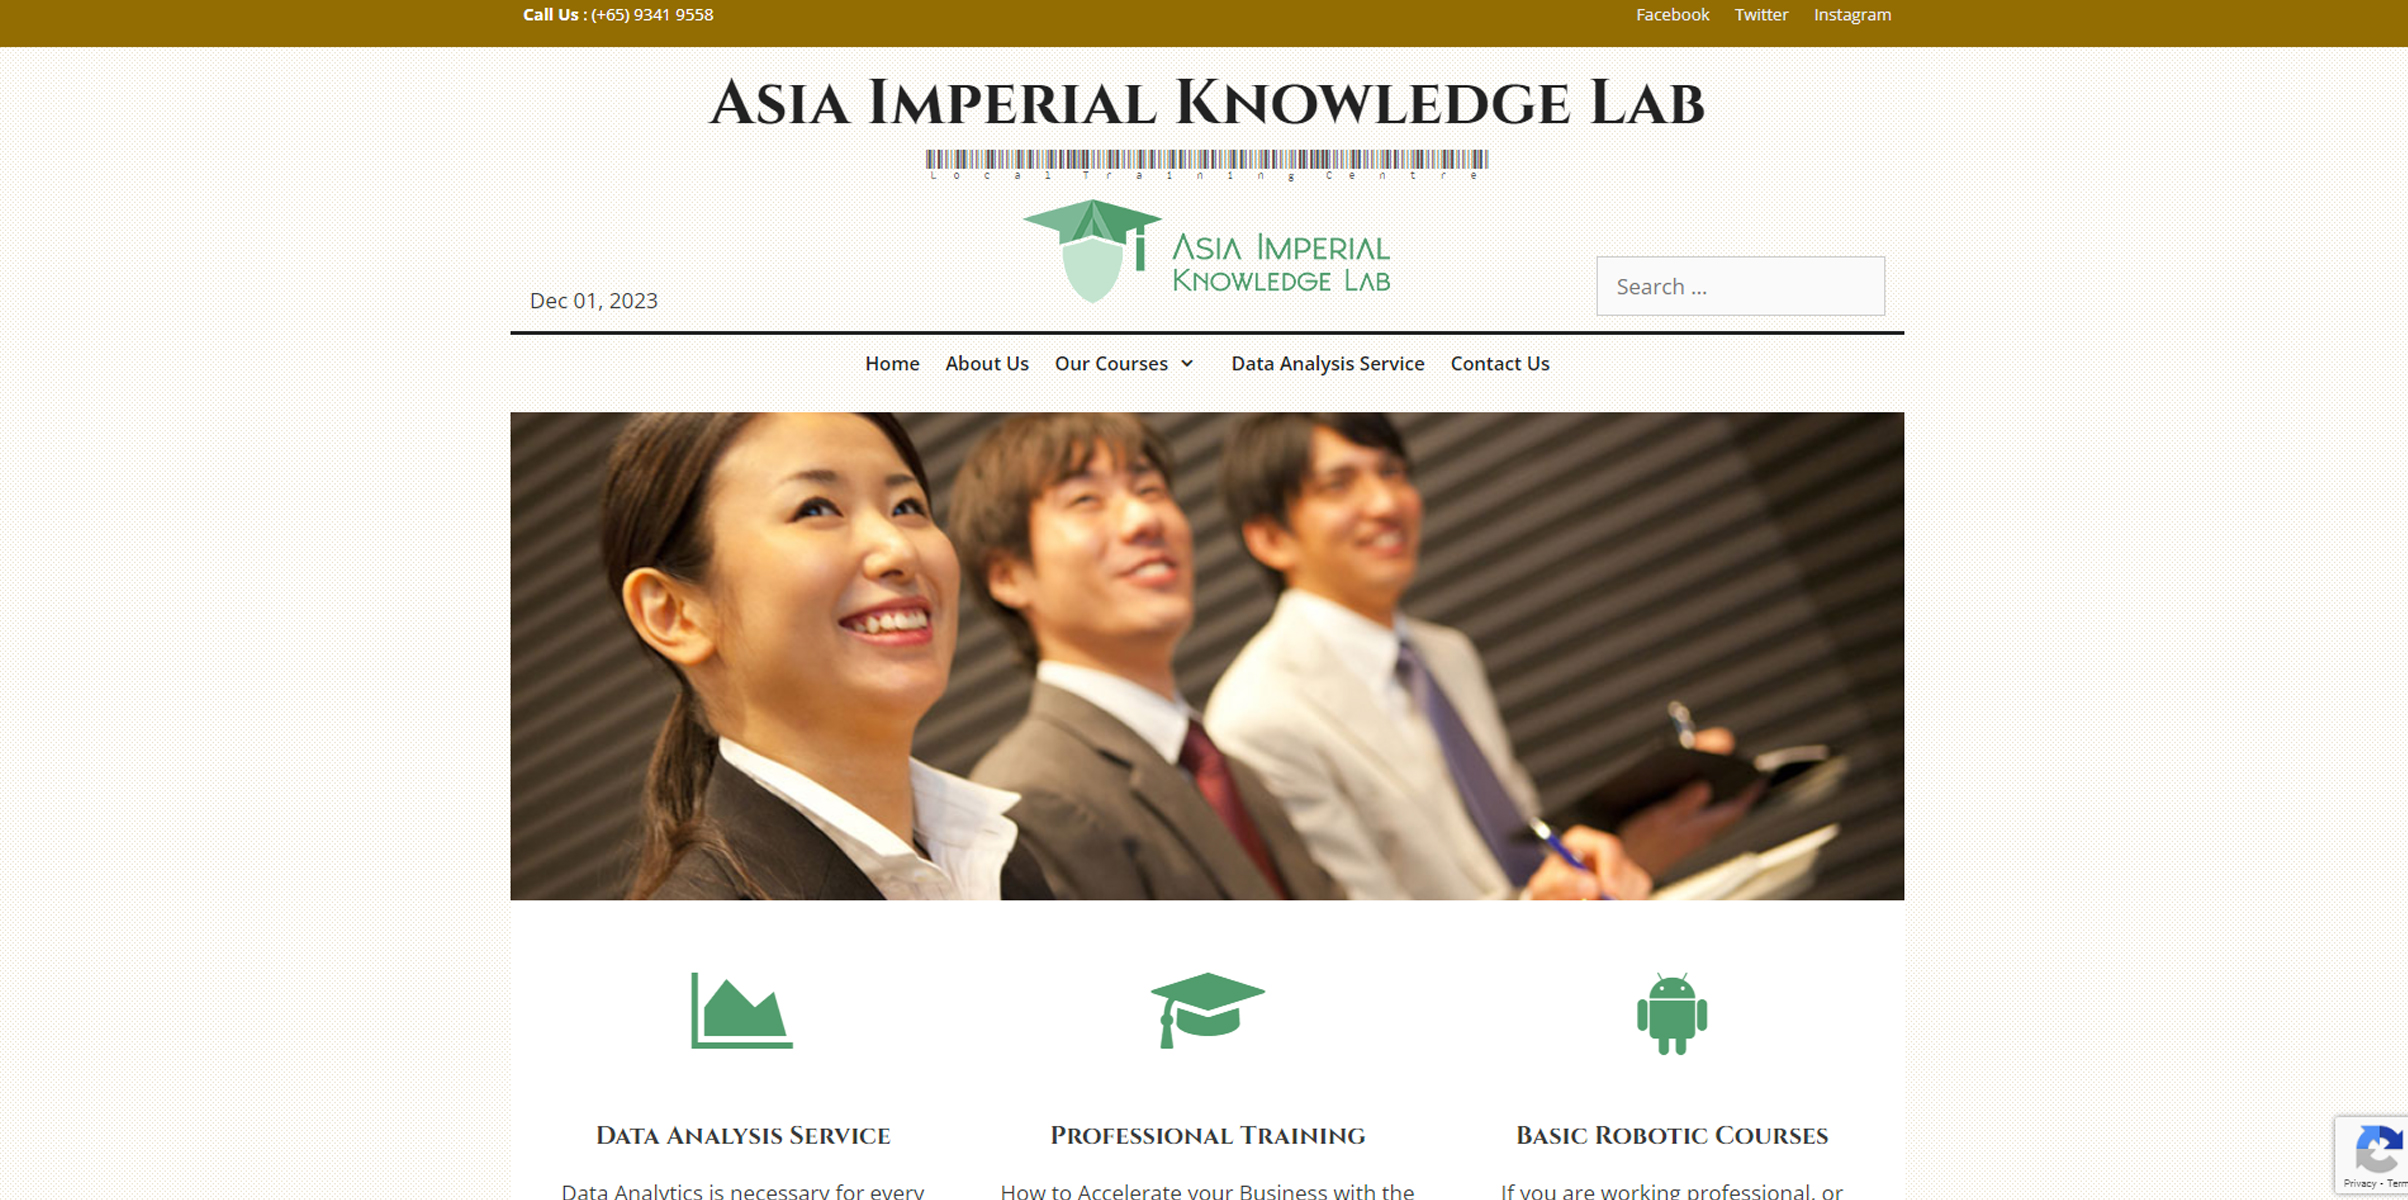 Asia Imperial Knowledge Lab (AIKL)